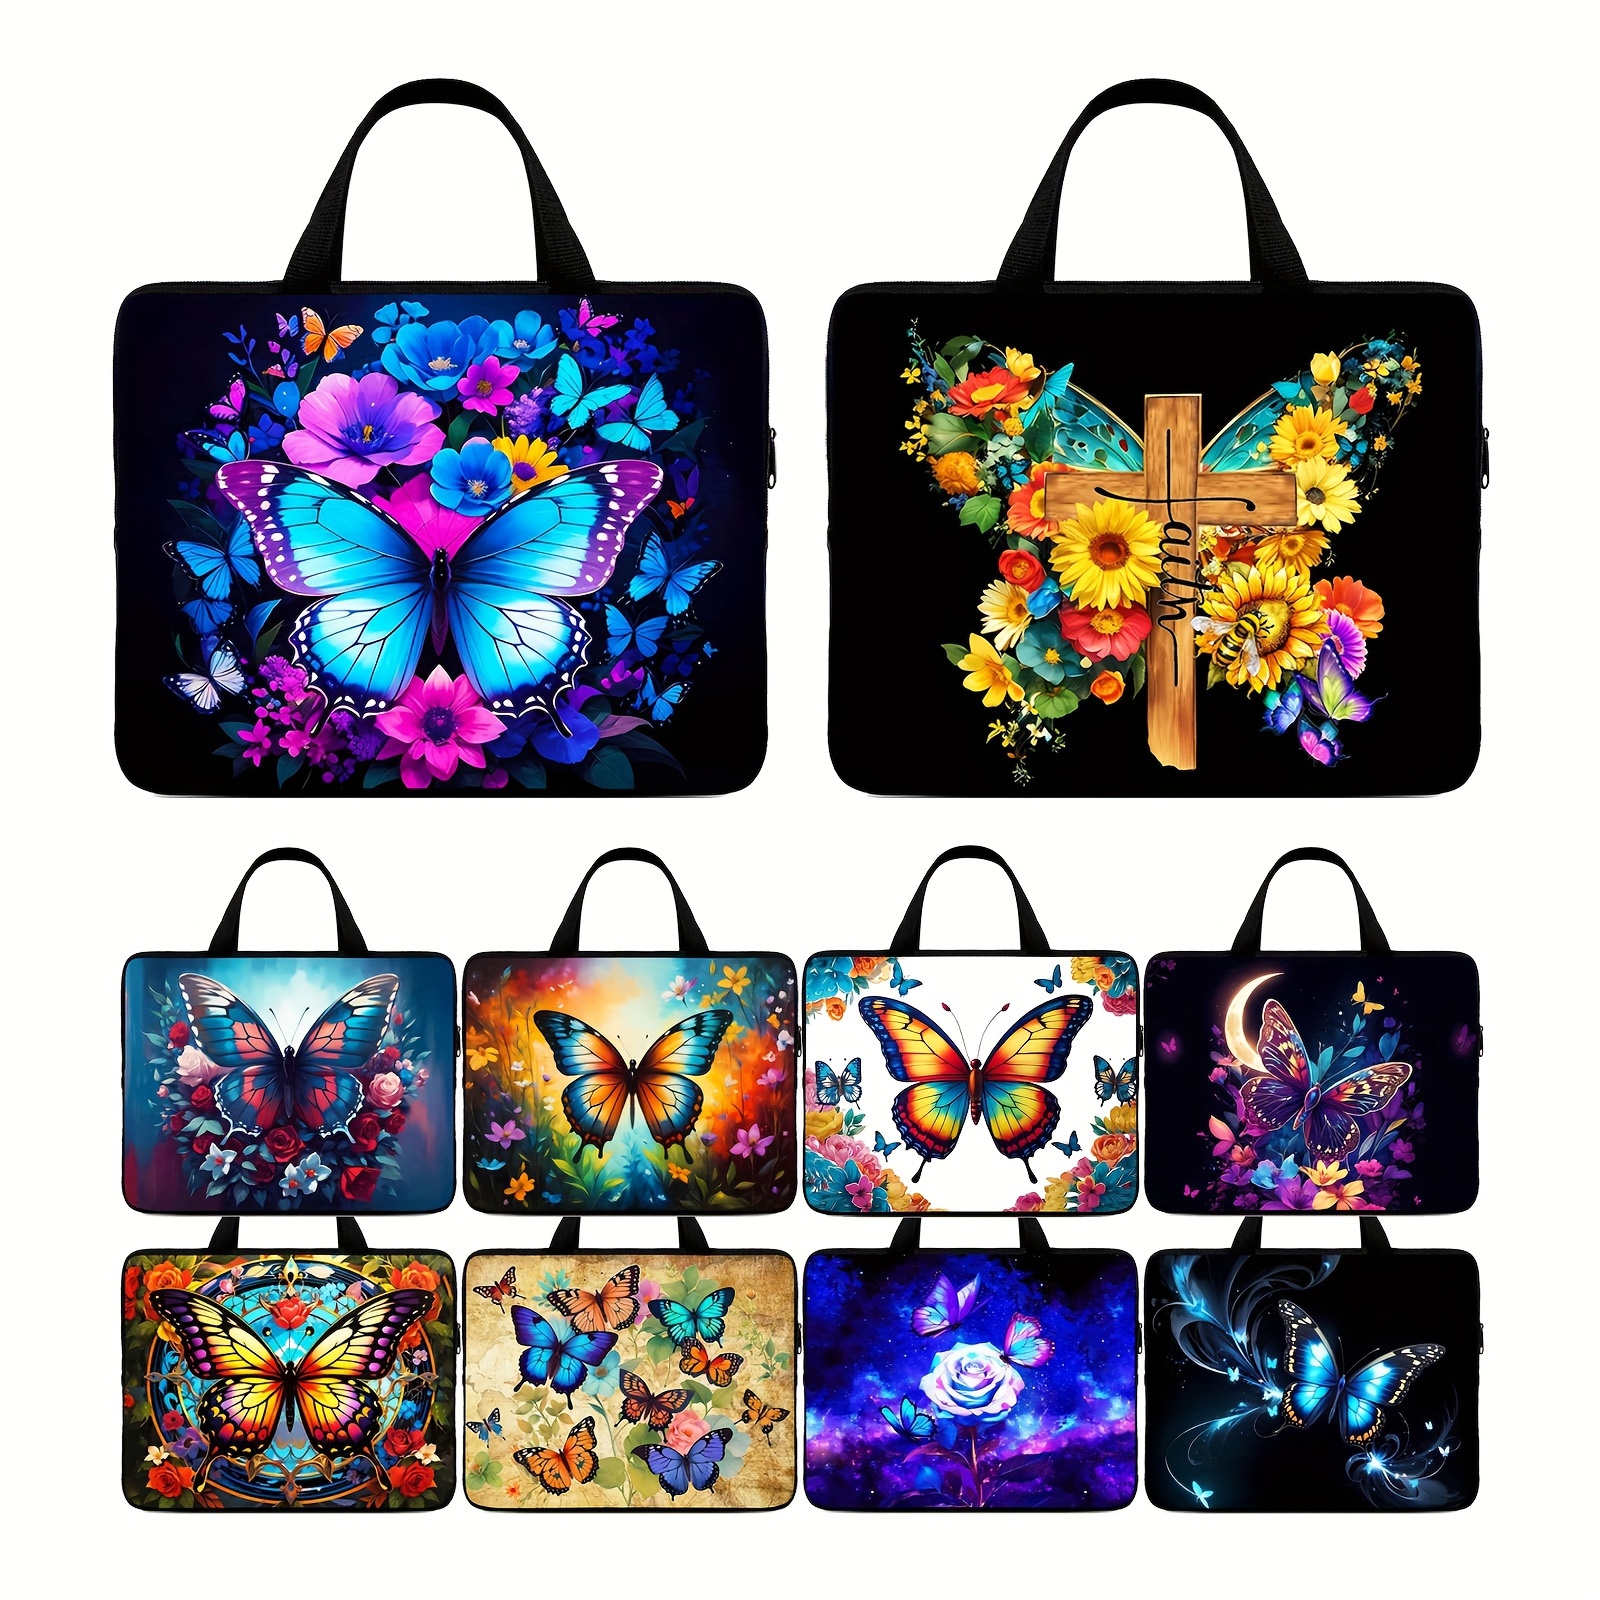 1pc butterfly laptop case suitable for soft surface laptop protective case computer case tablet case commuter briefcase handbag file storage bag ideal choice for gifts school bags valentines gifts